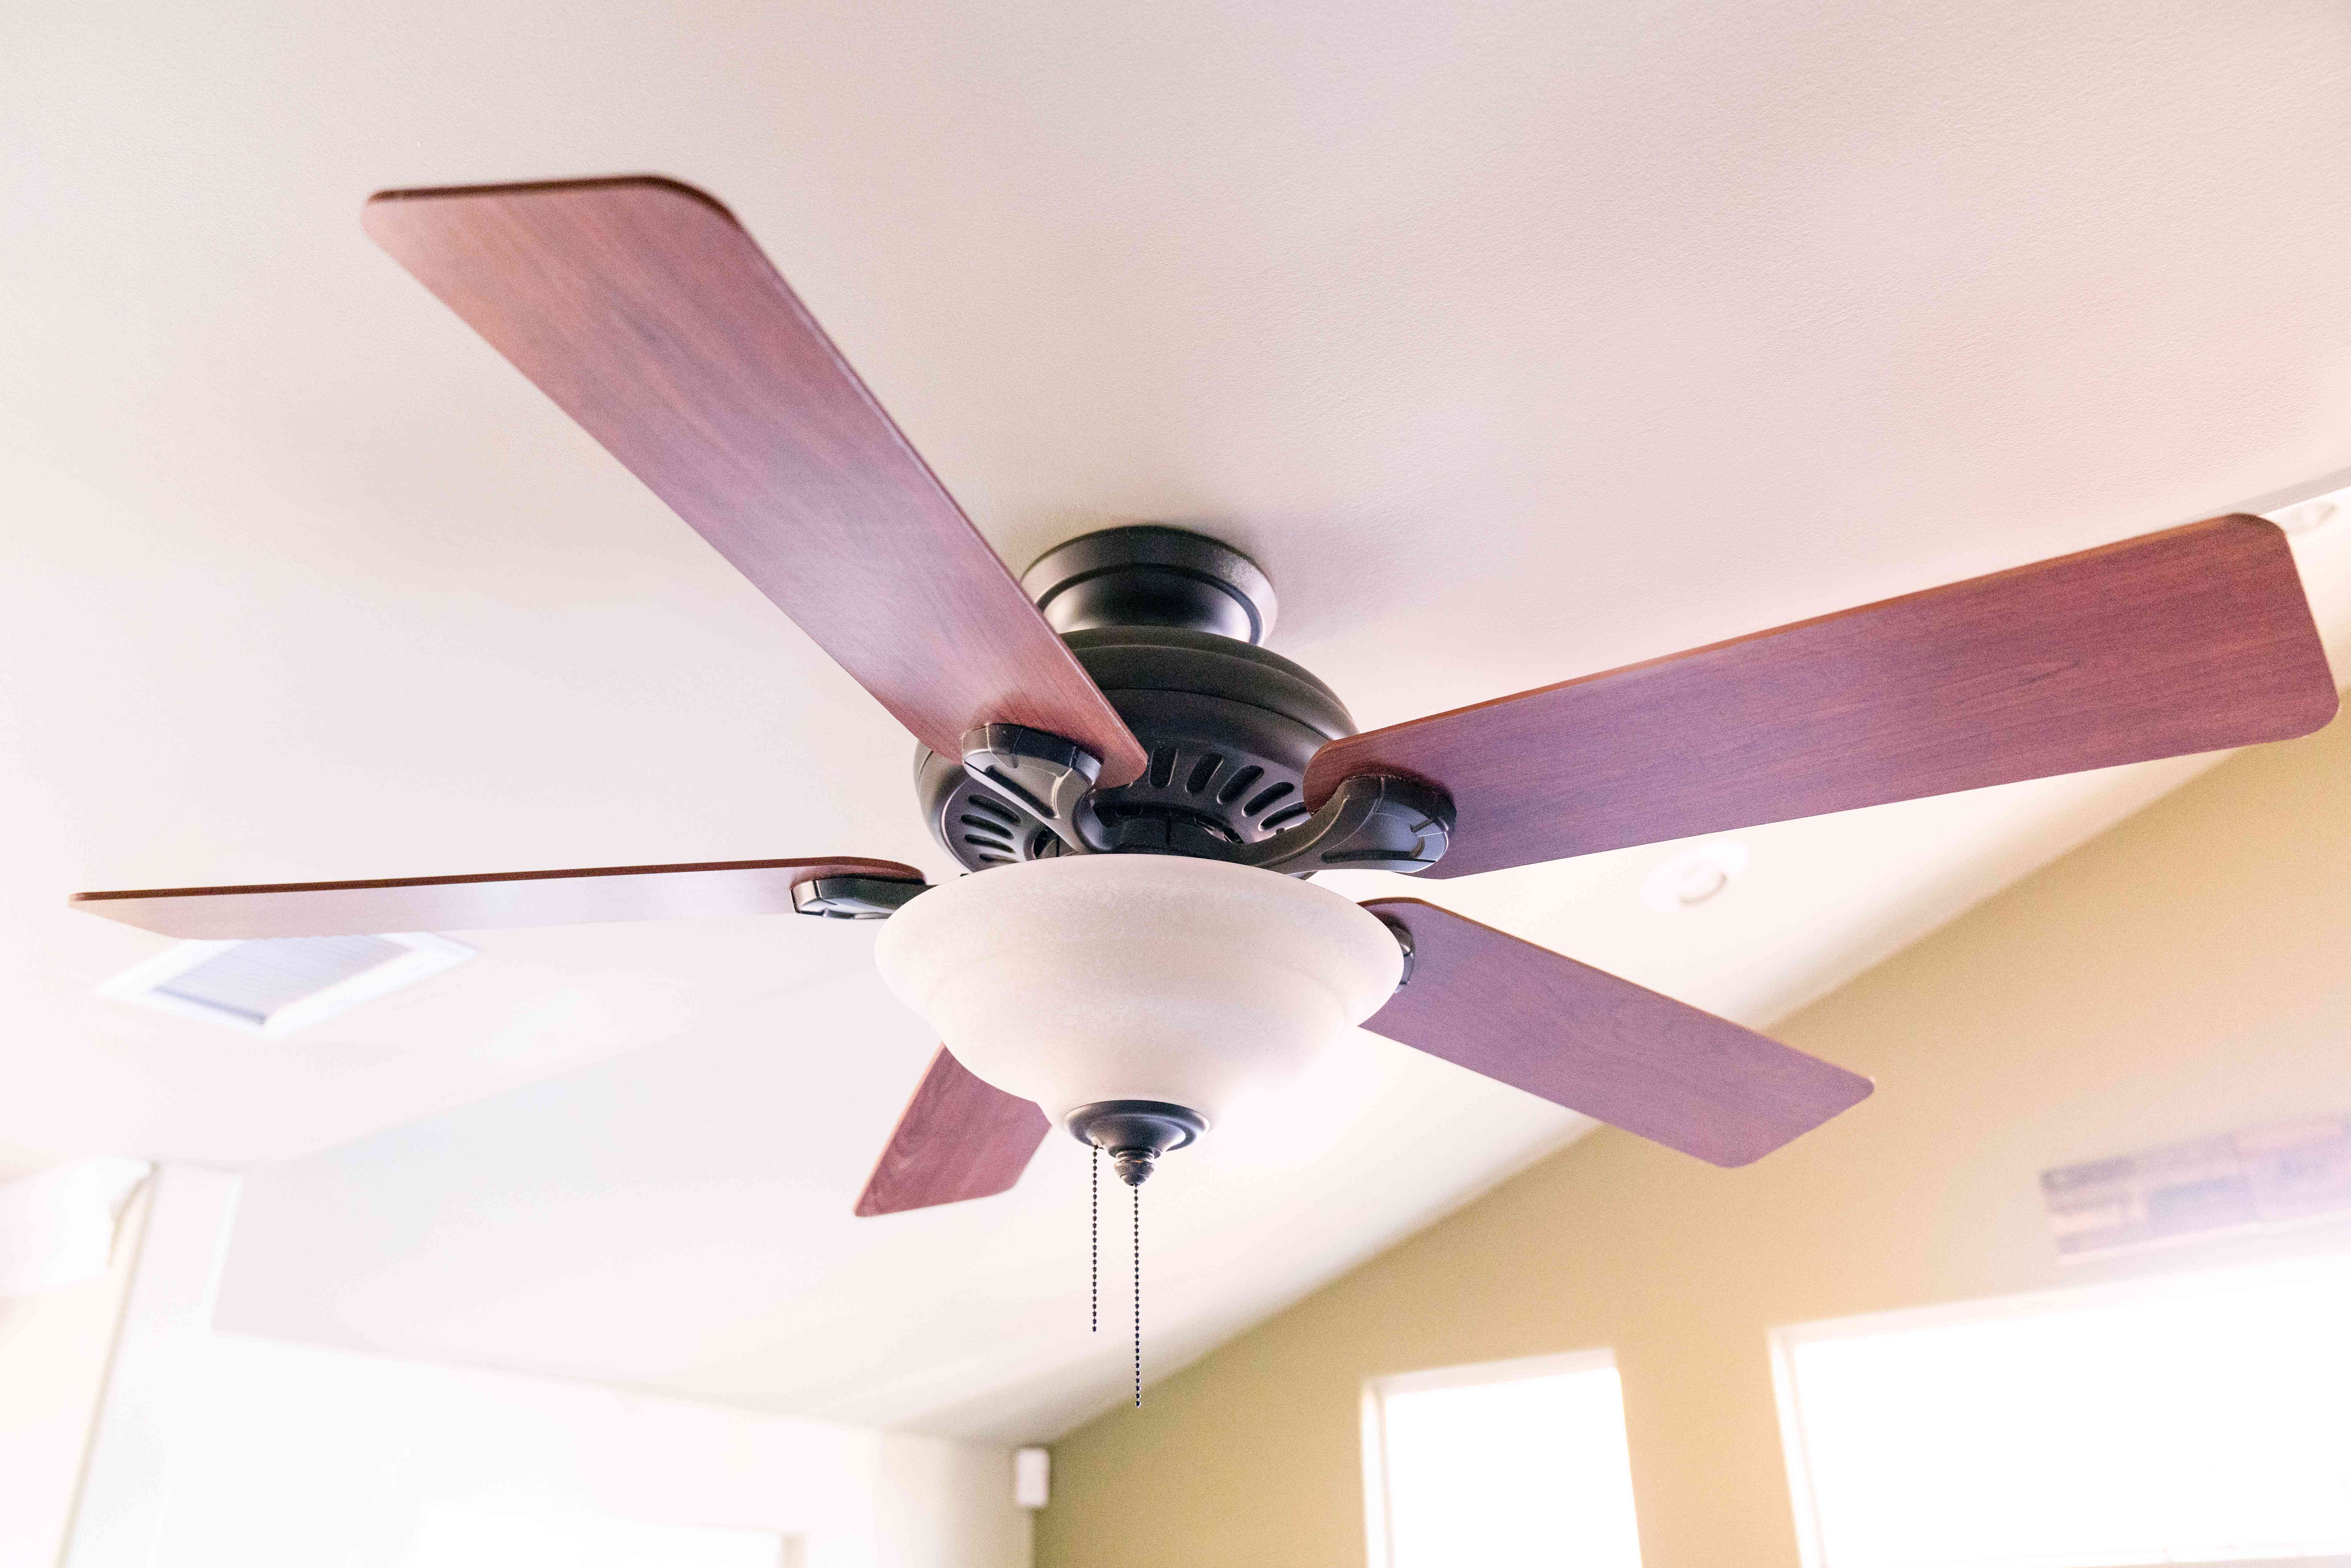 How To Install A Ceiling Fan Without Existing Wiring And No Attic Access